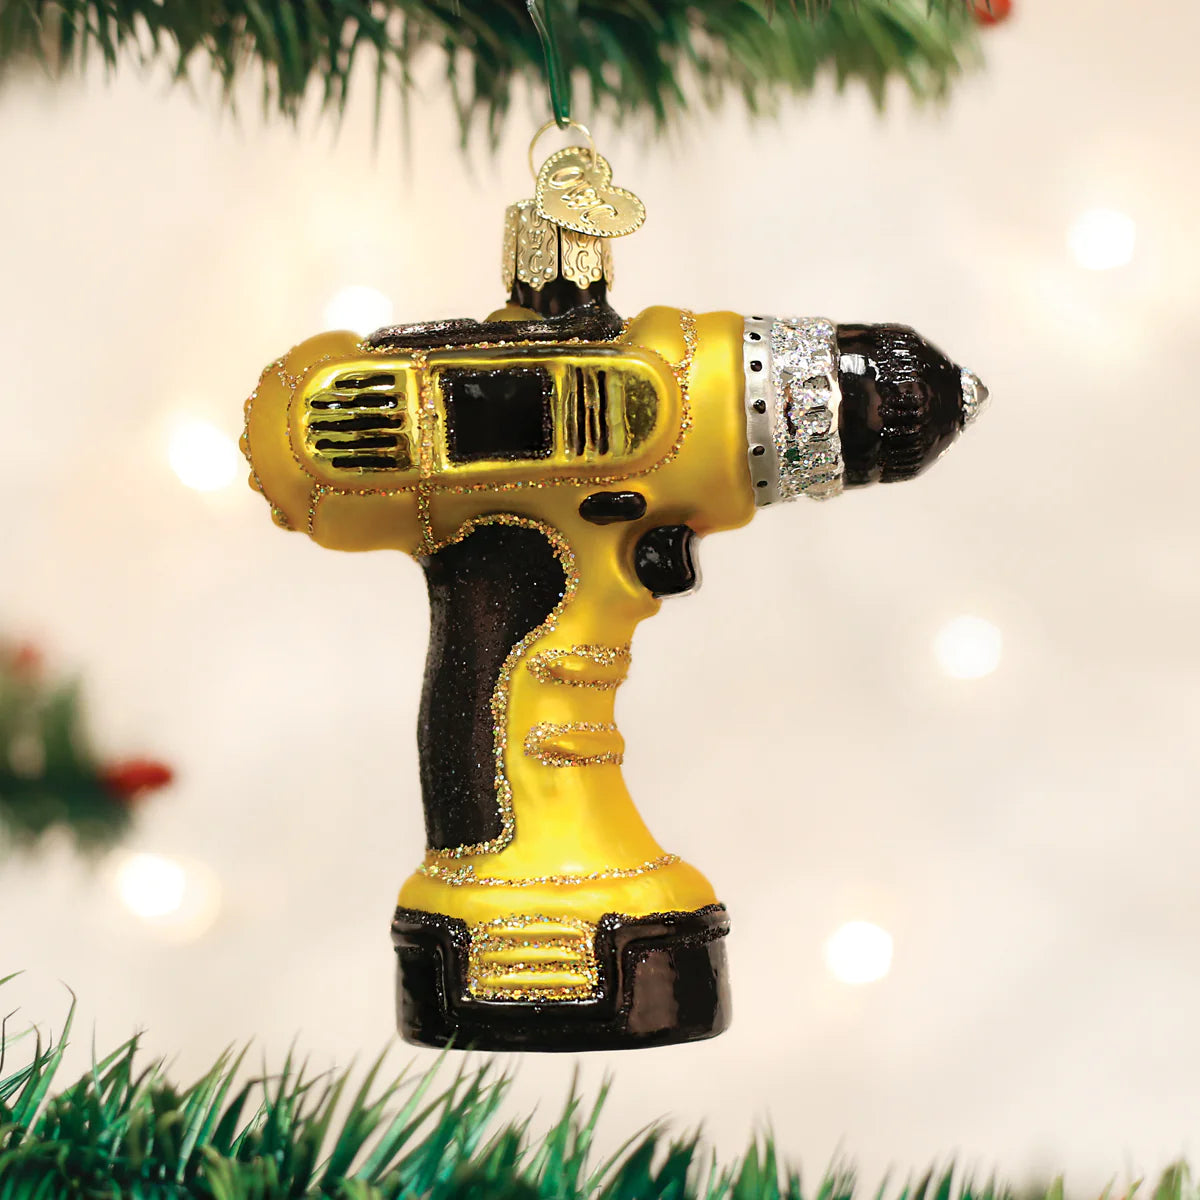 Power Drill Ornament  Old World Christmas   